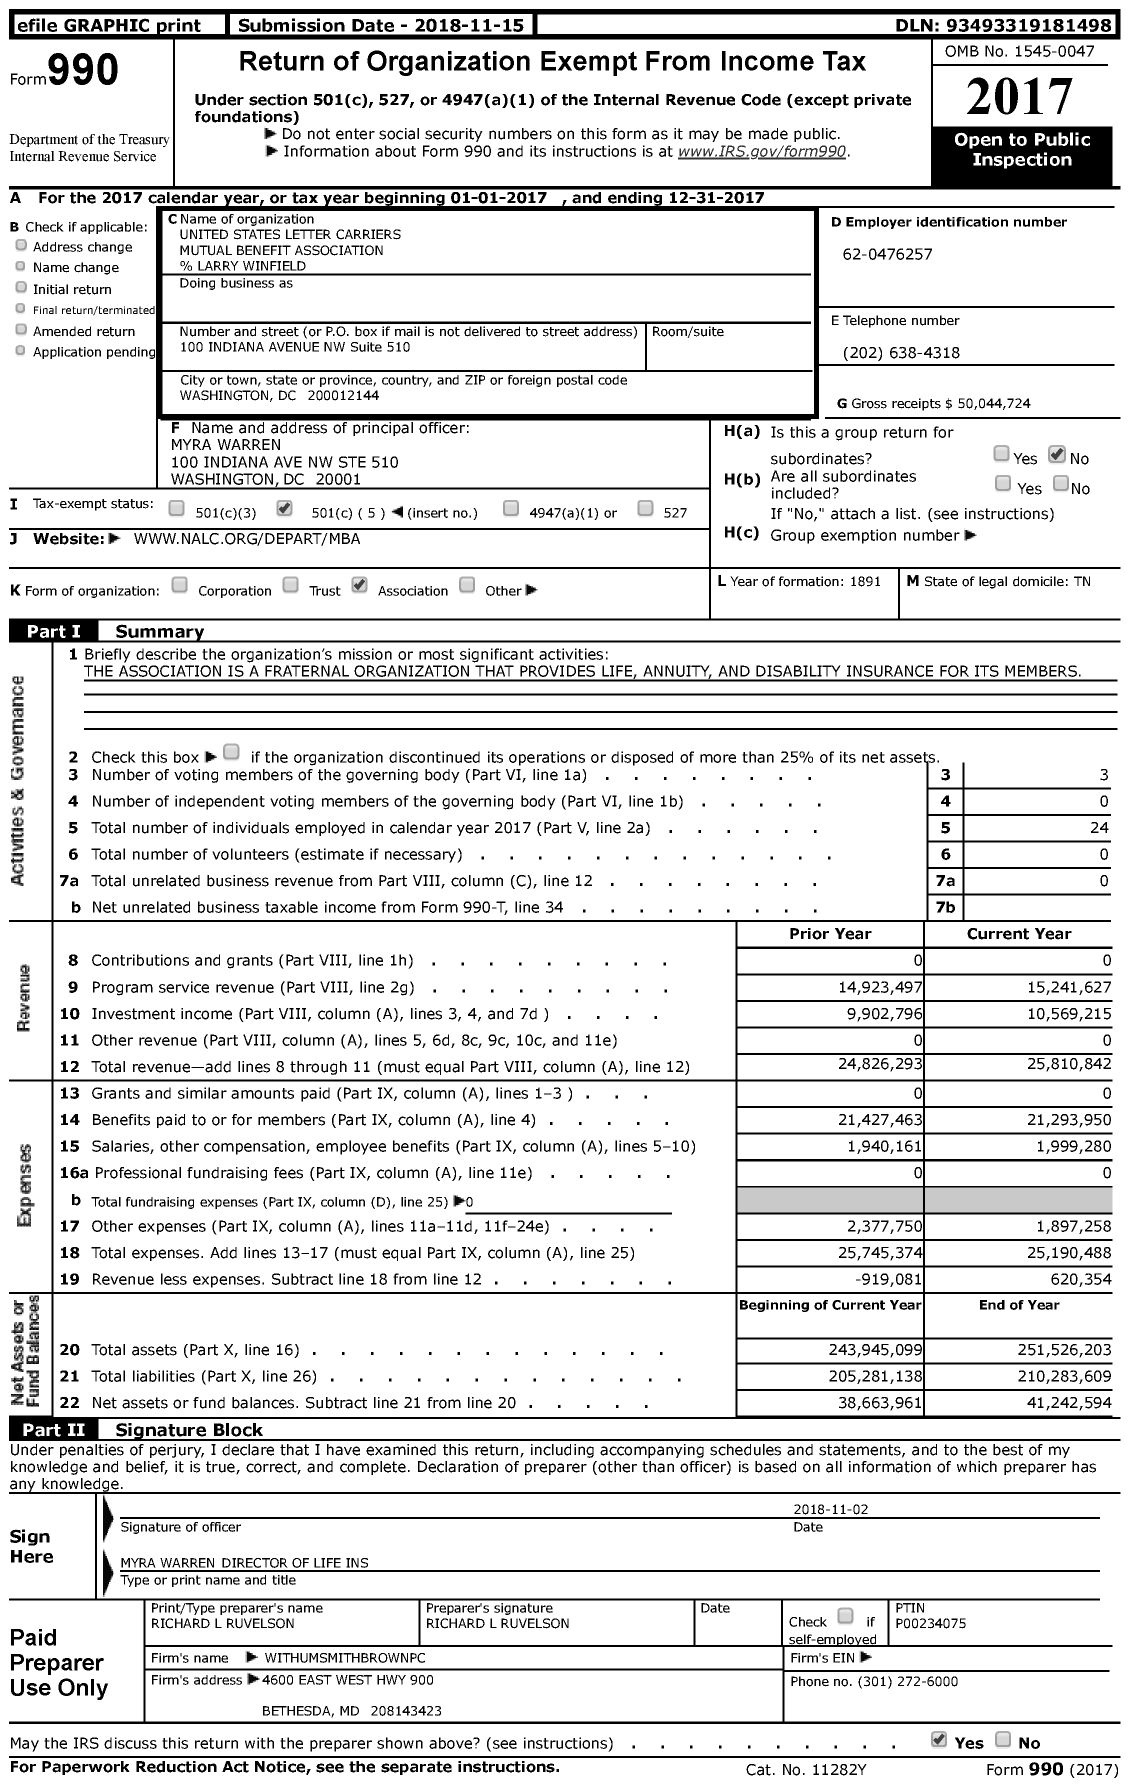 Image of first page of 2017 Form 990 for United States Letter Carriers Mutual Benefit Association